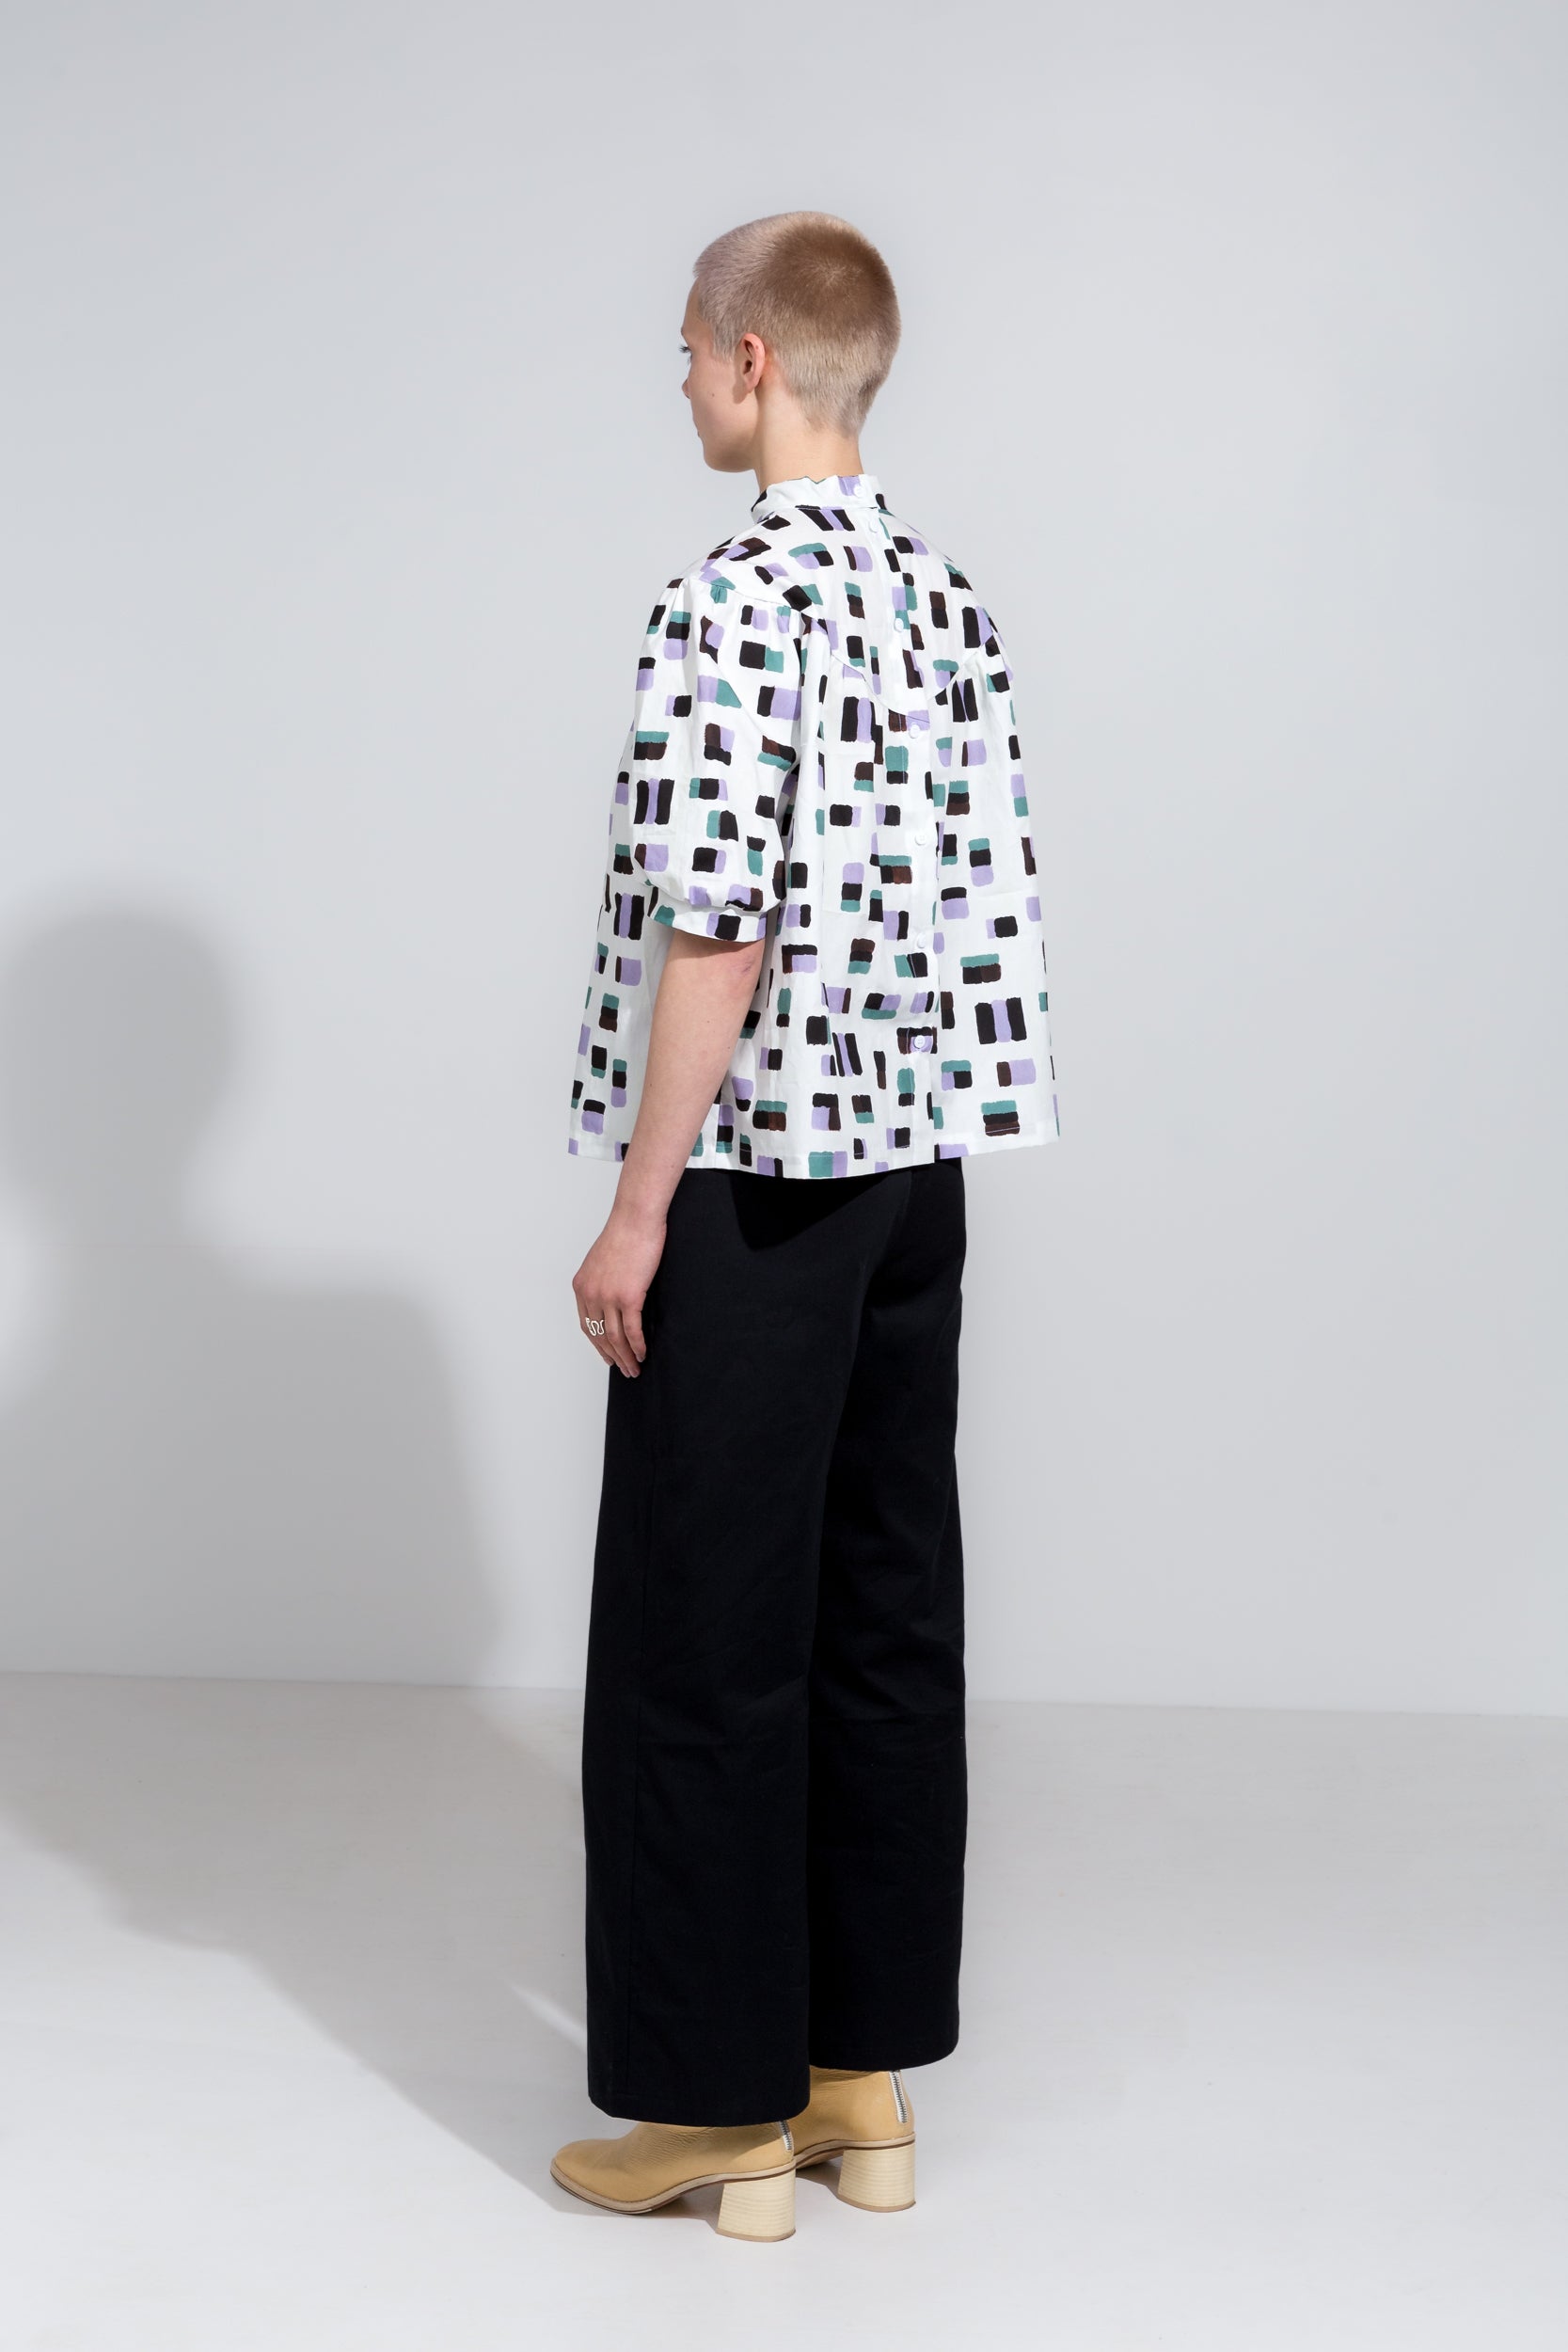 Puff sleeve shirt in print with high collar and black organic cotton workwear pants